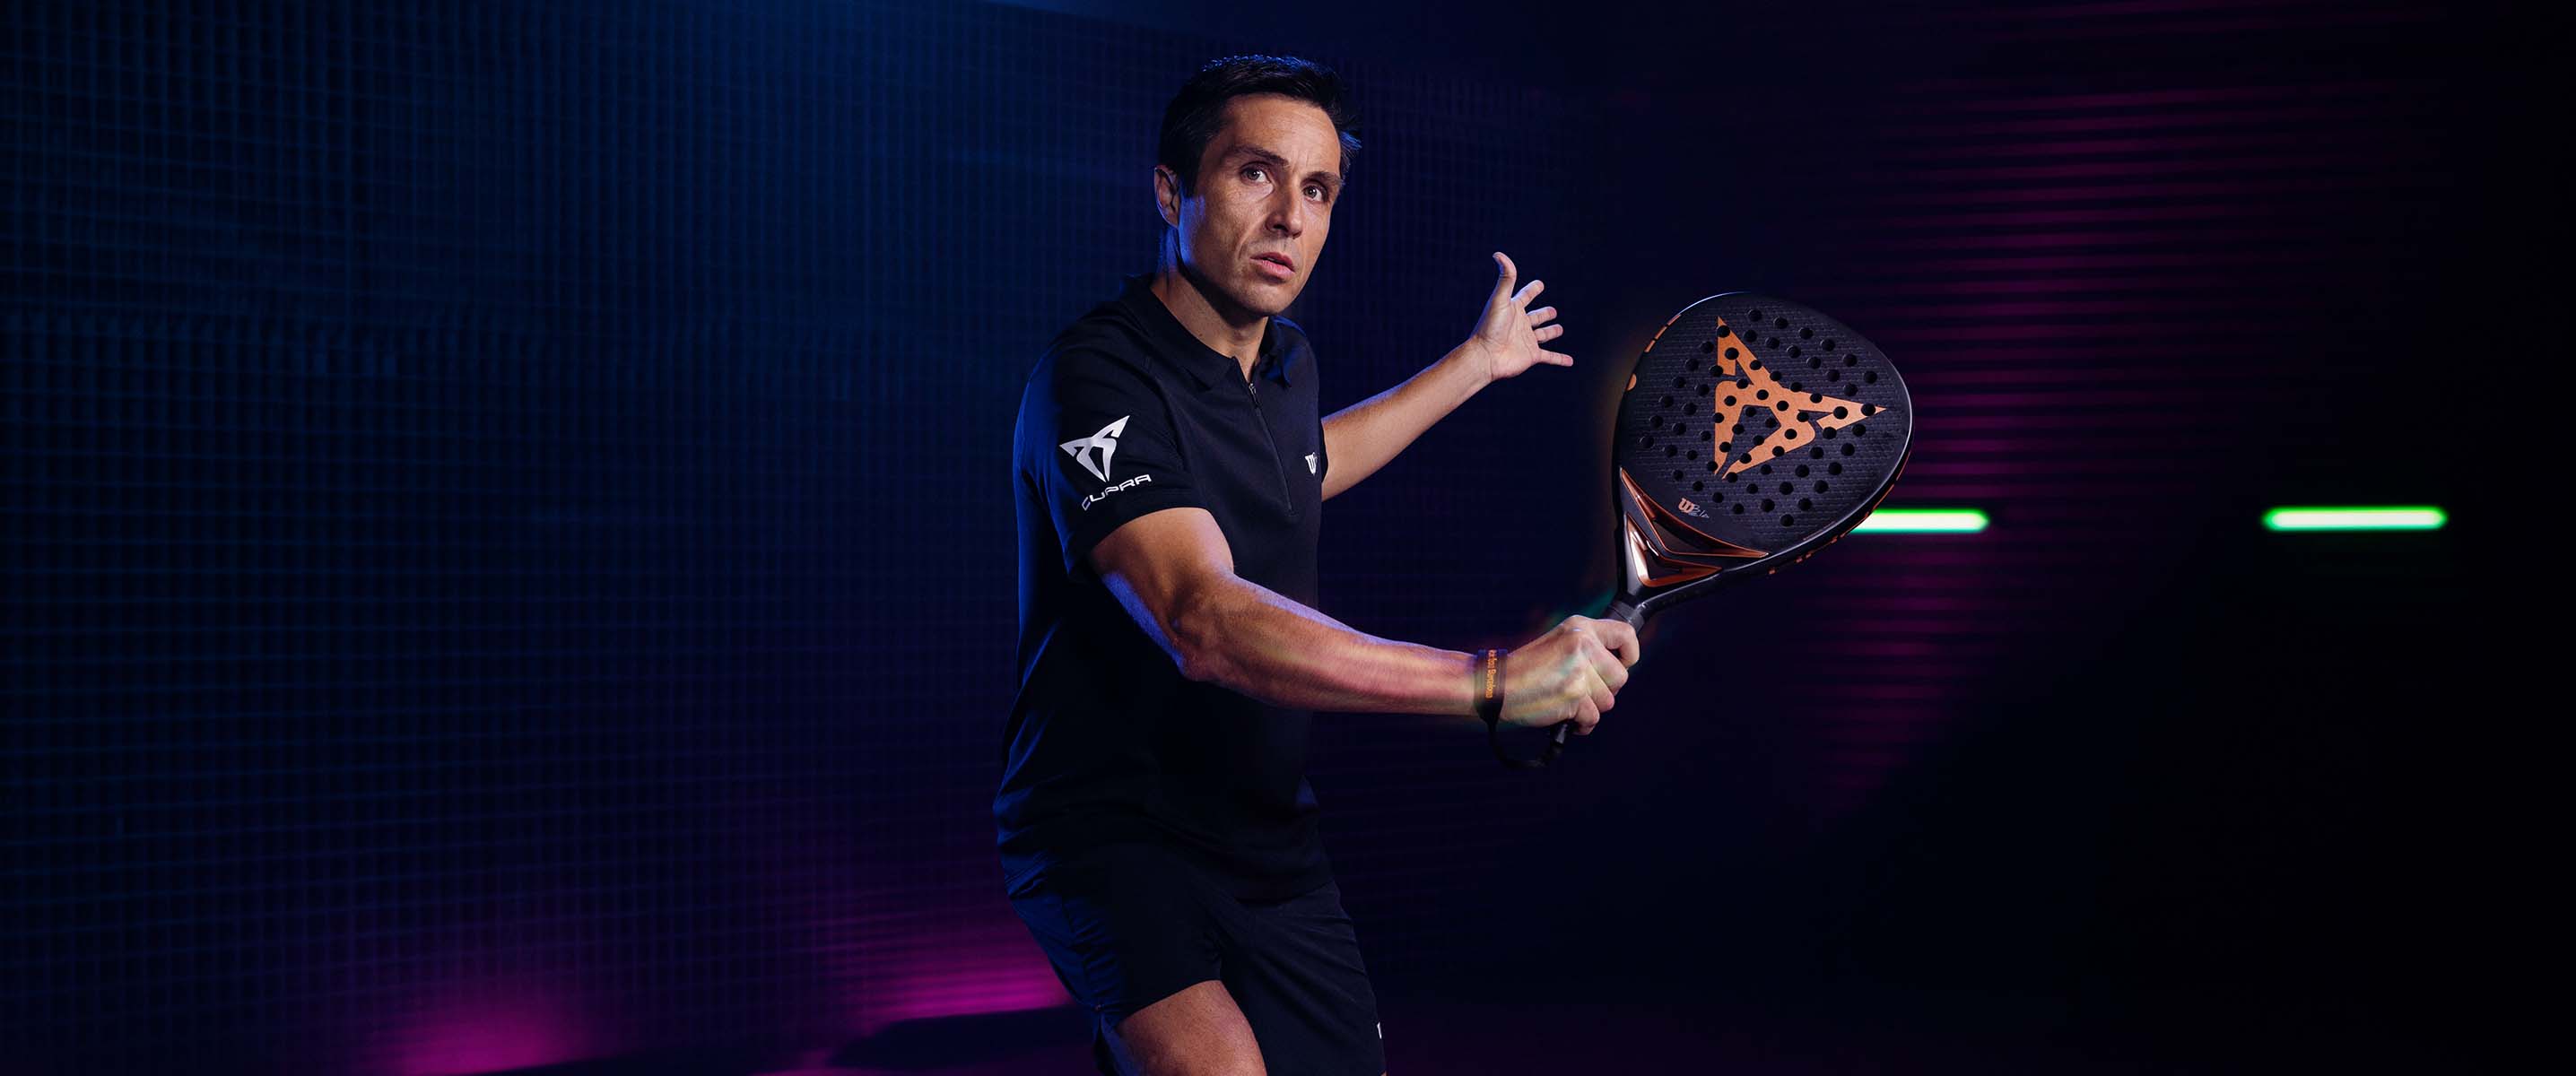 CUPRA will sponsor world padel tour for 3 more years